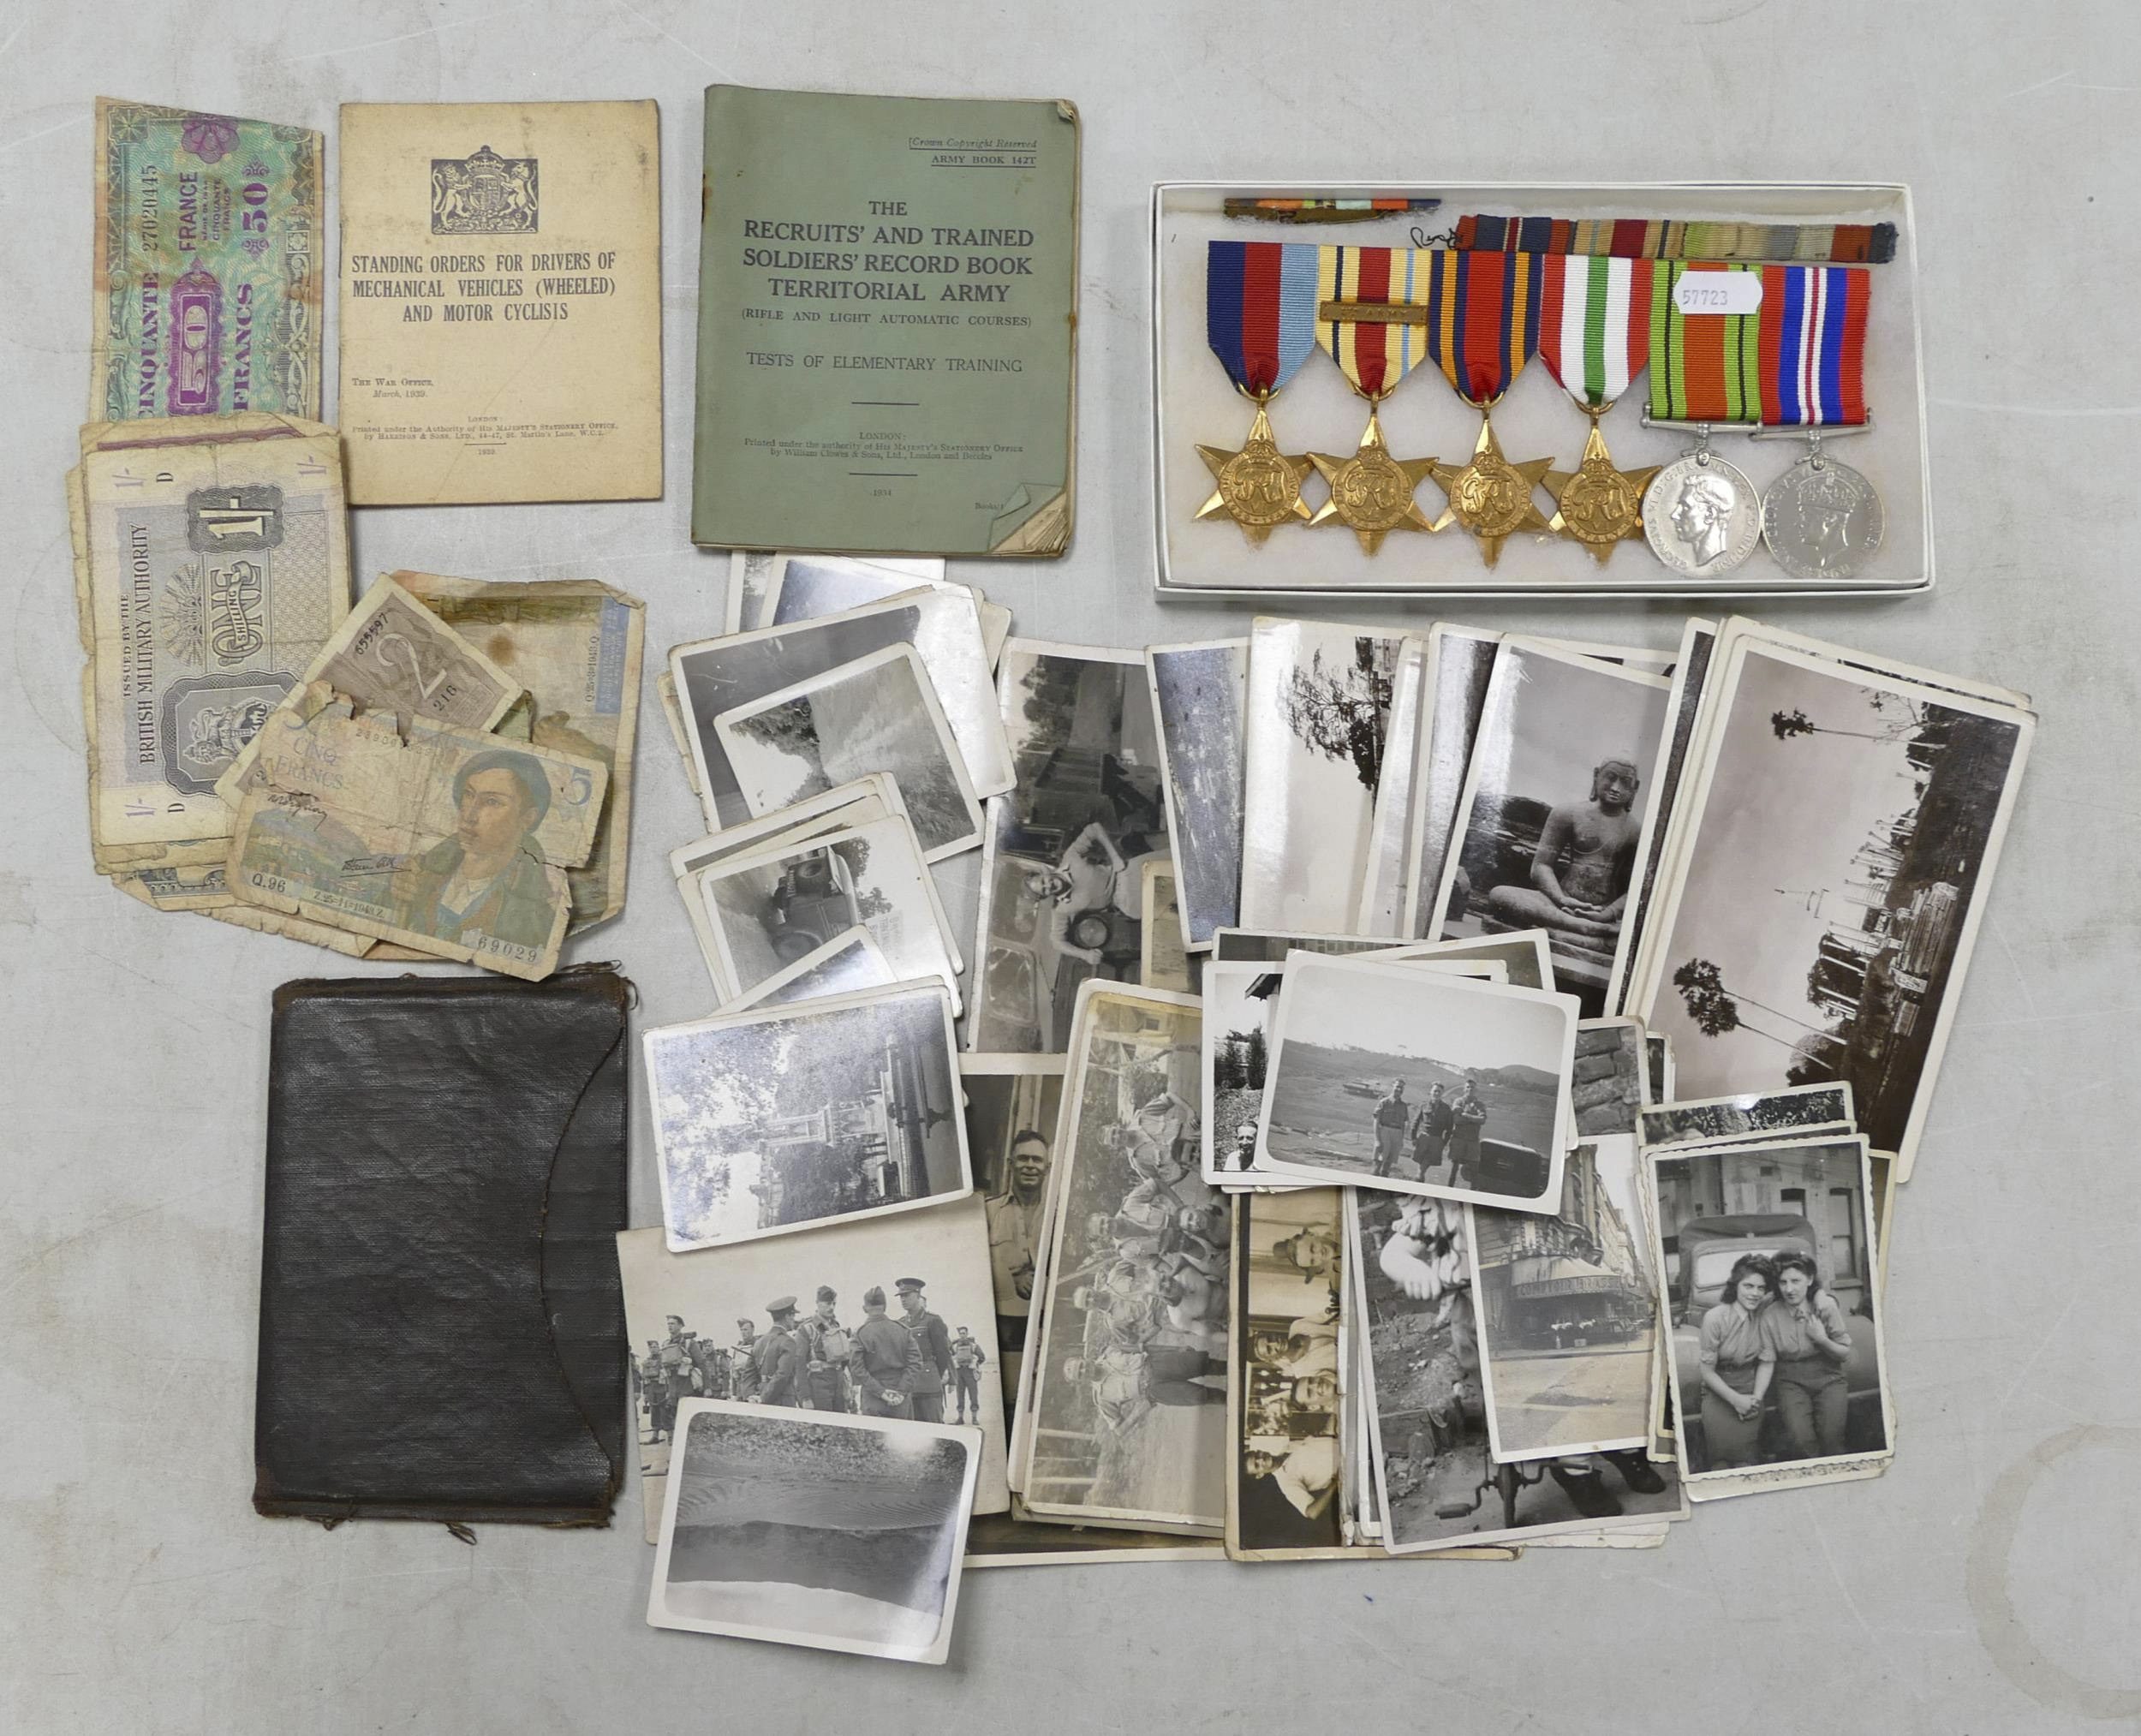 This collection of medals and items belonging to a soldier, including a group of medals such as an Africa Star with 8th Army bar, Italy star, 1939-1945 star, Burma star, Defense and Victory medal together with Army jacket & various Army books, currency and photographs from Burma, currency and more, sold for £220.